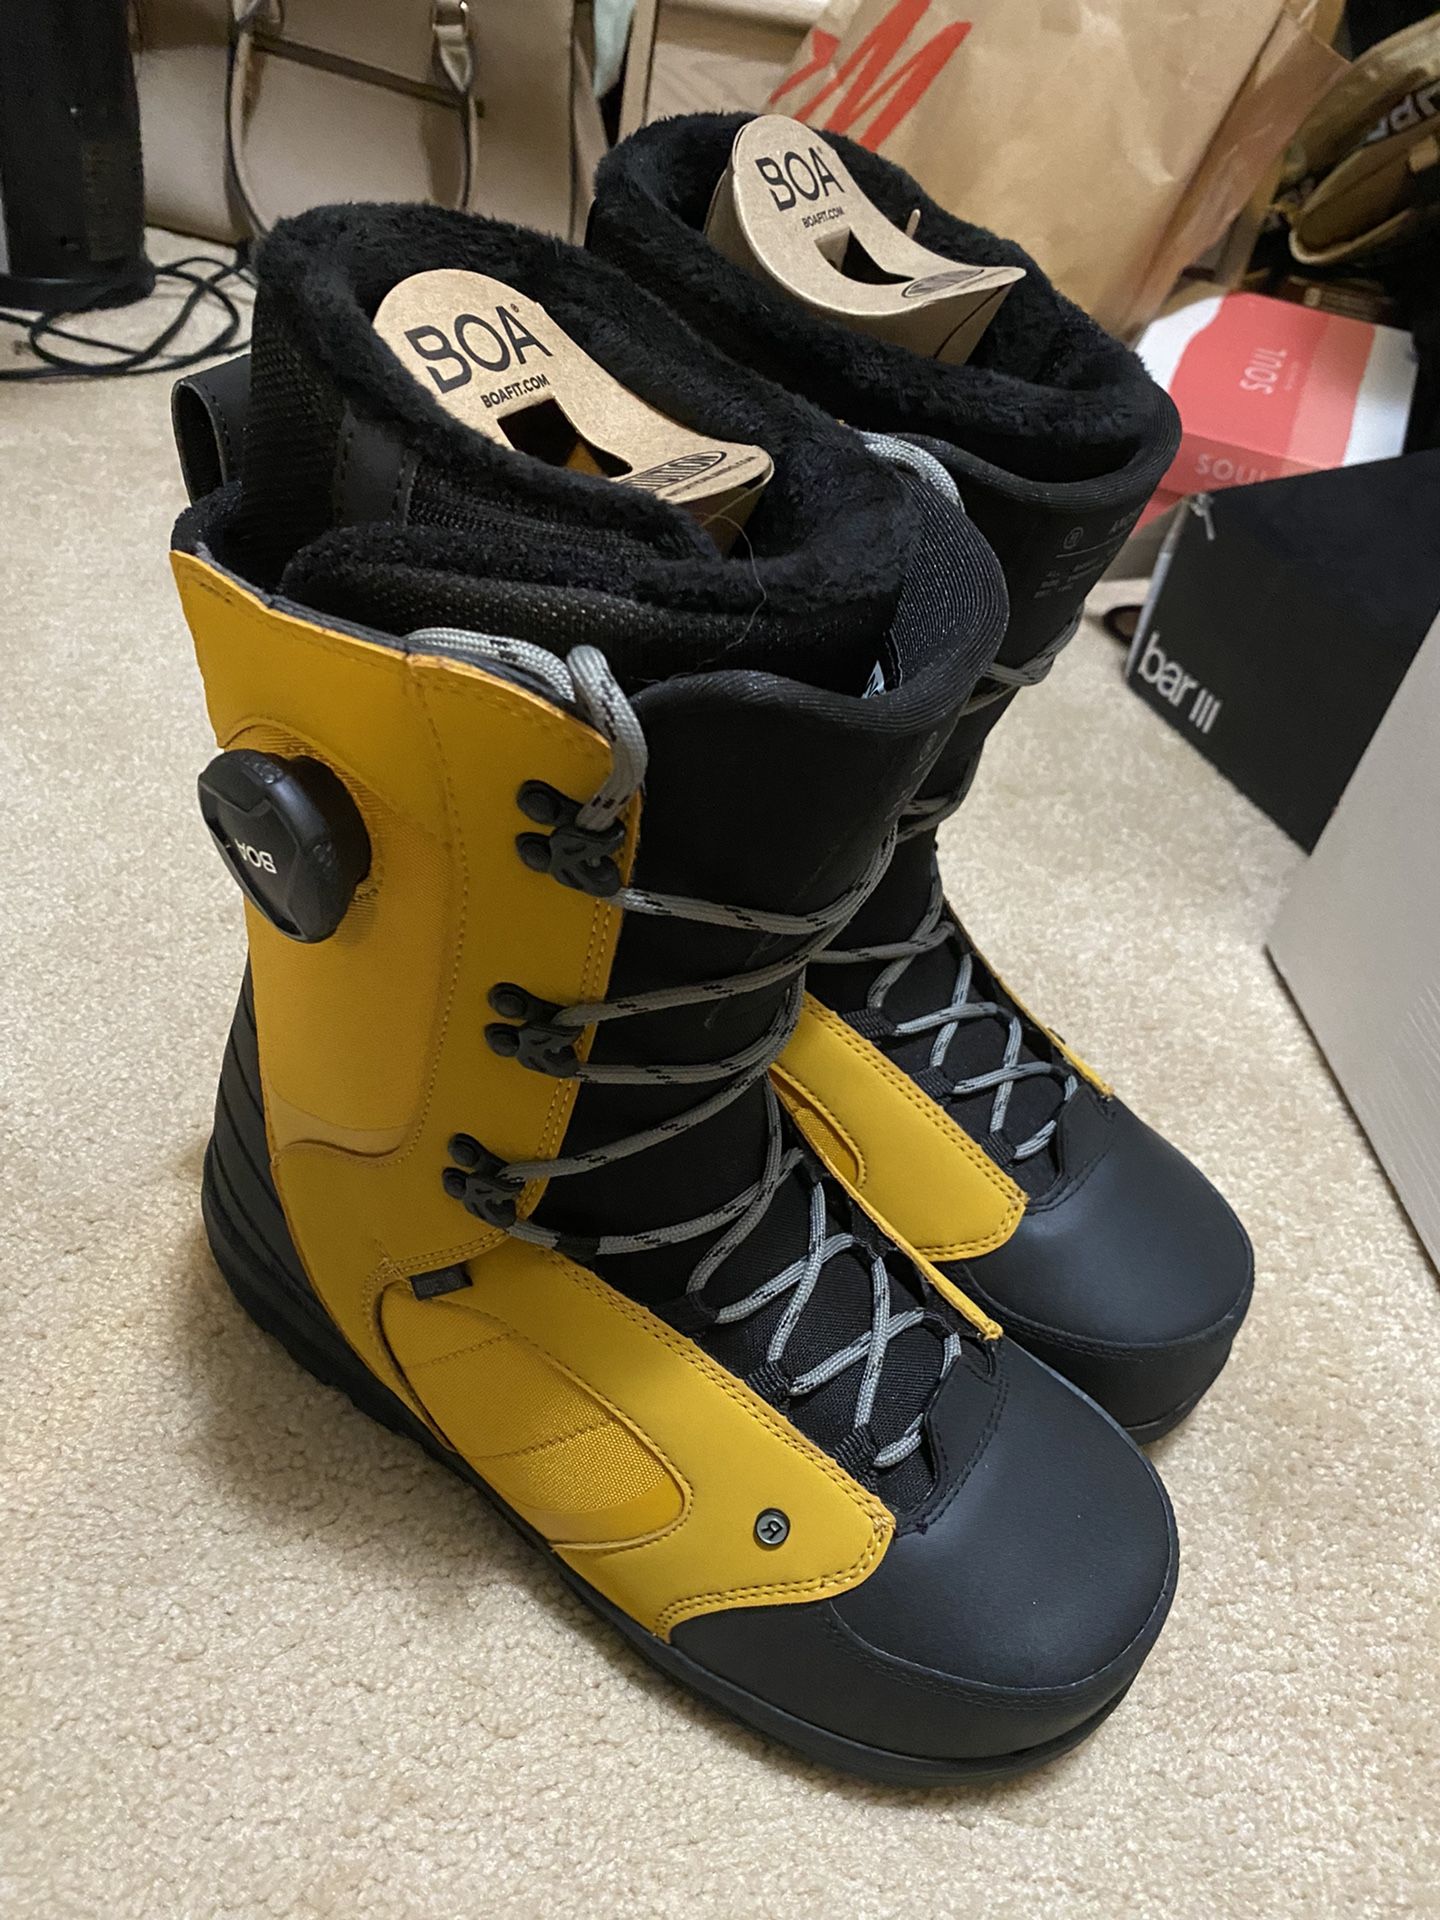 NEW - RIDE ANCHOR 11.5 M, ORIG. $275.00 Snowboard Boot